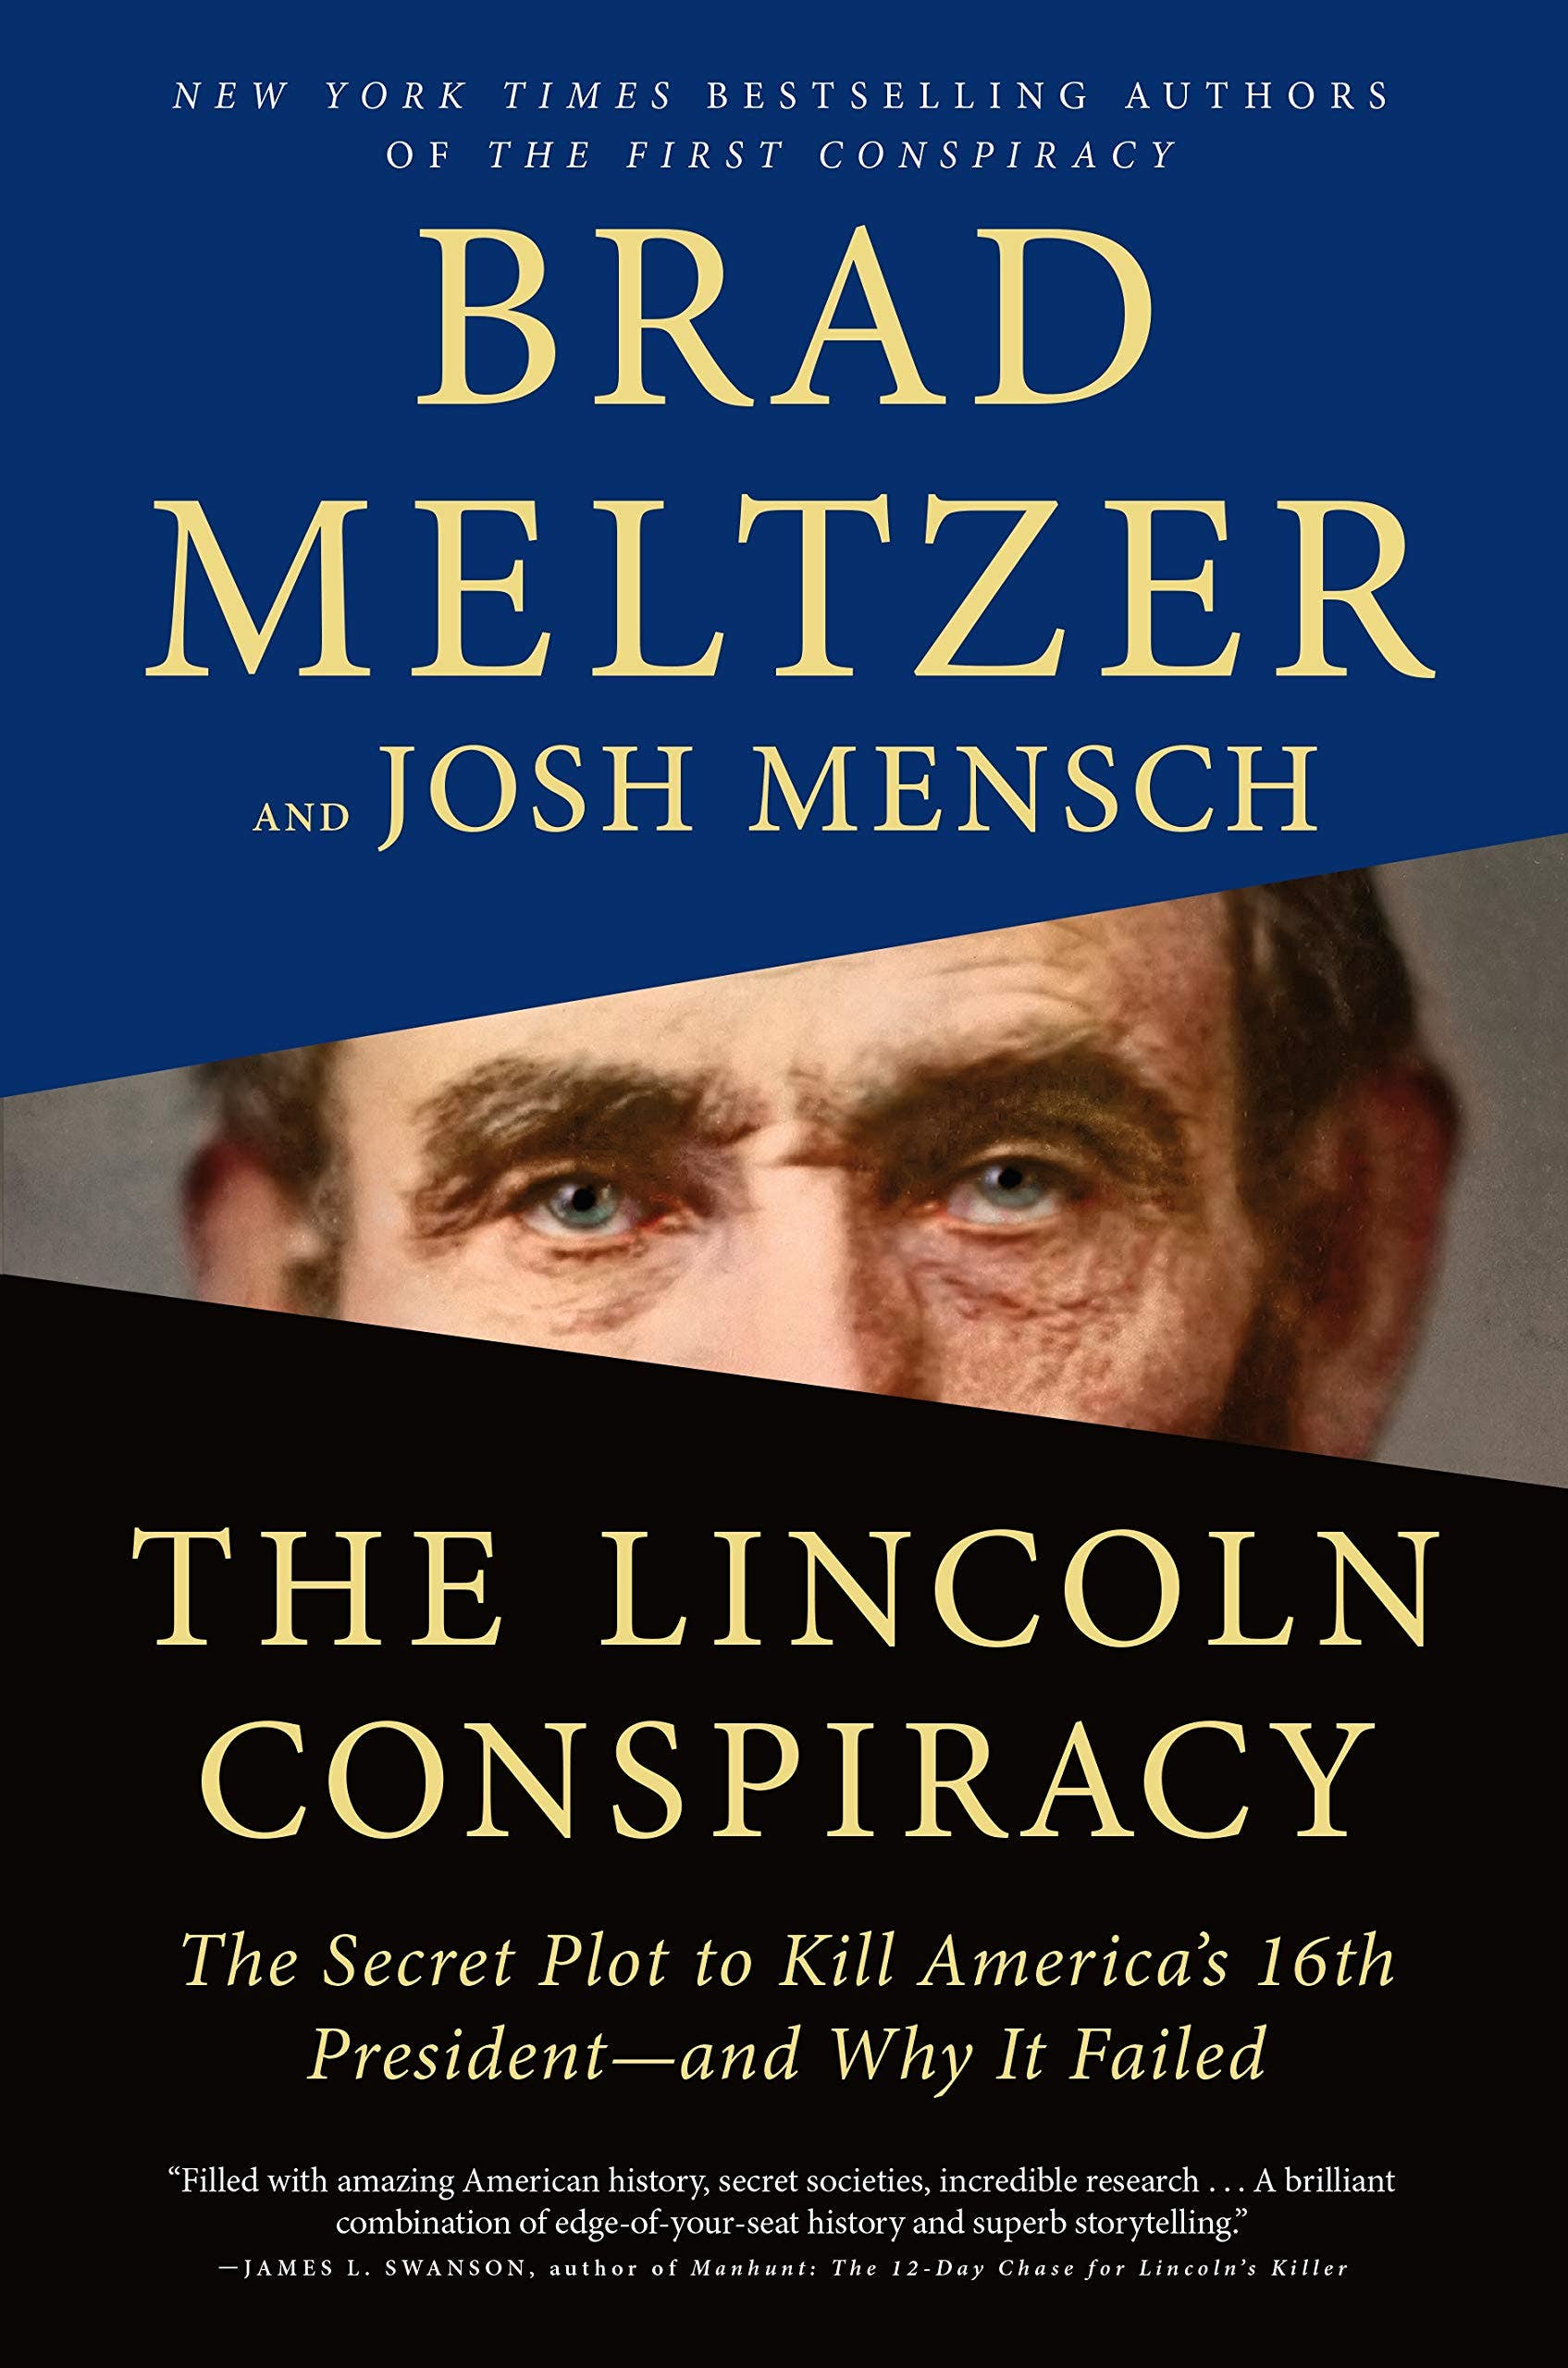 'The Lincoln Conspiracy' by Brad Meltzer and Josh Mensch